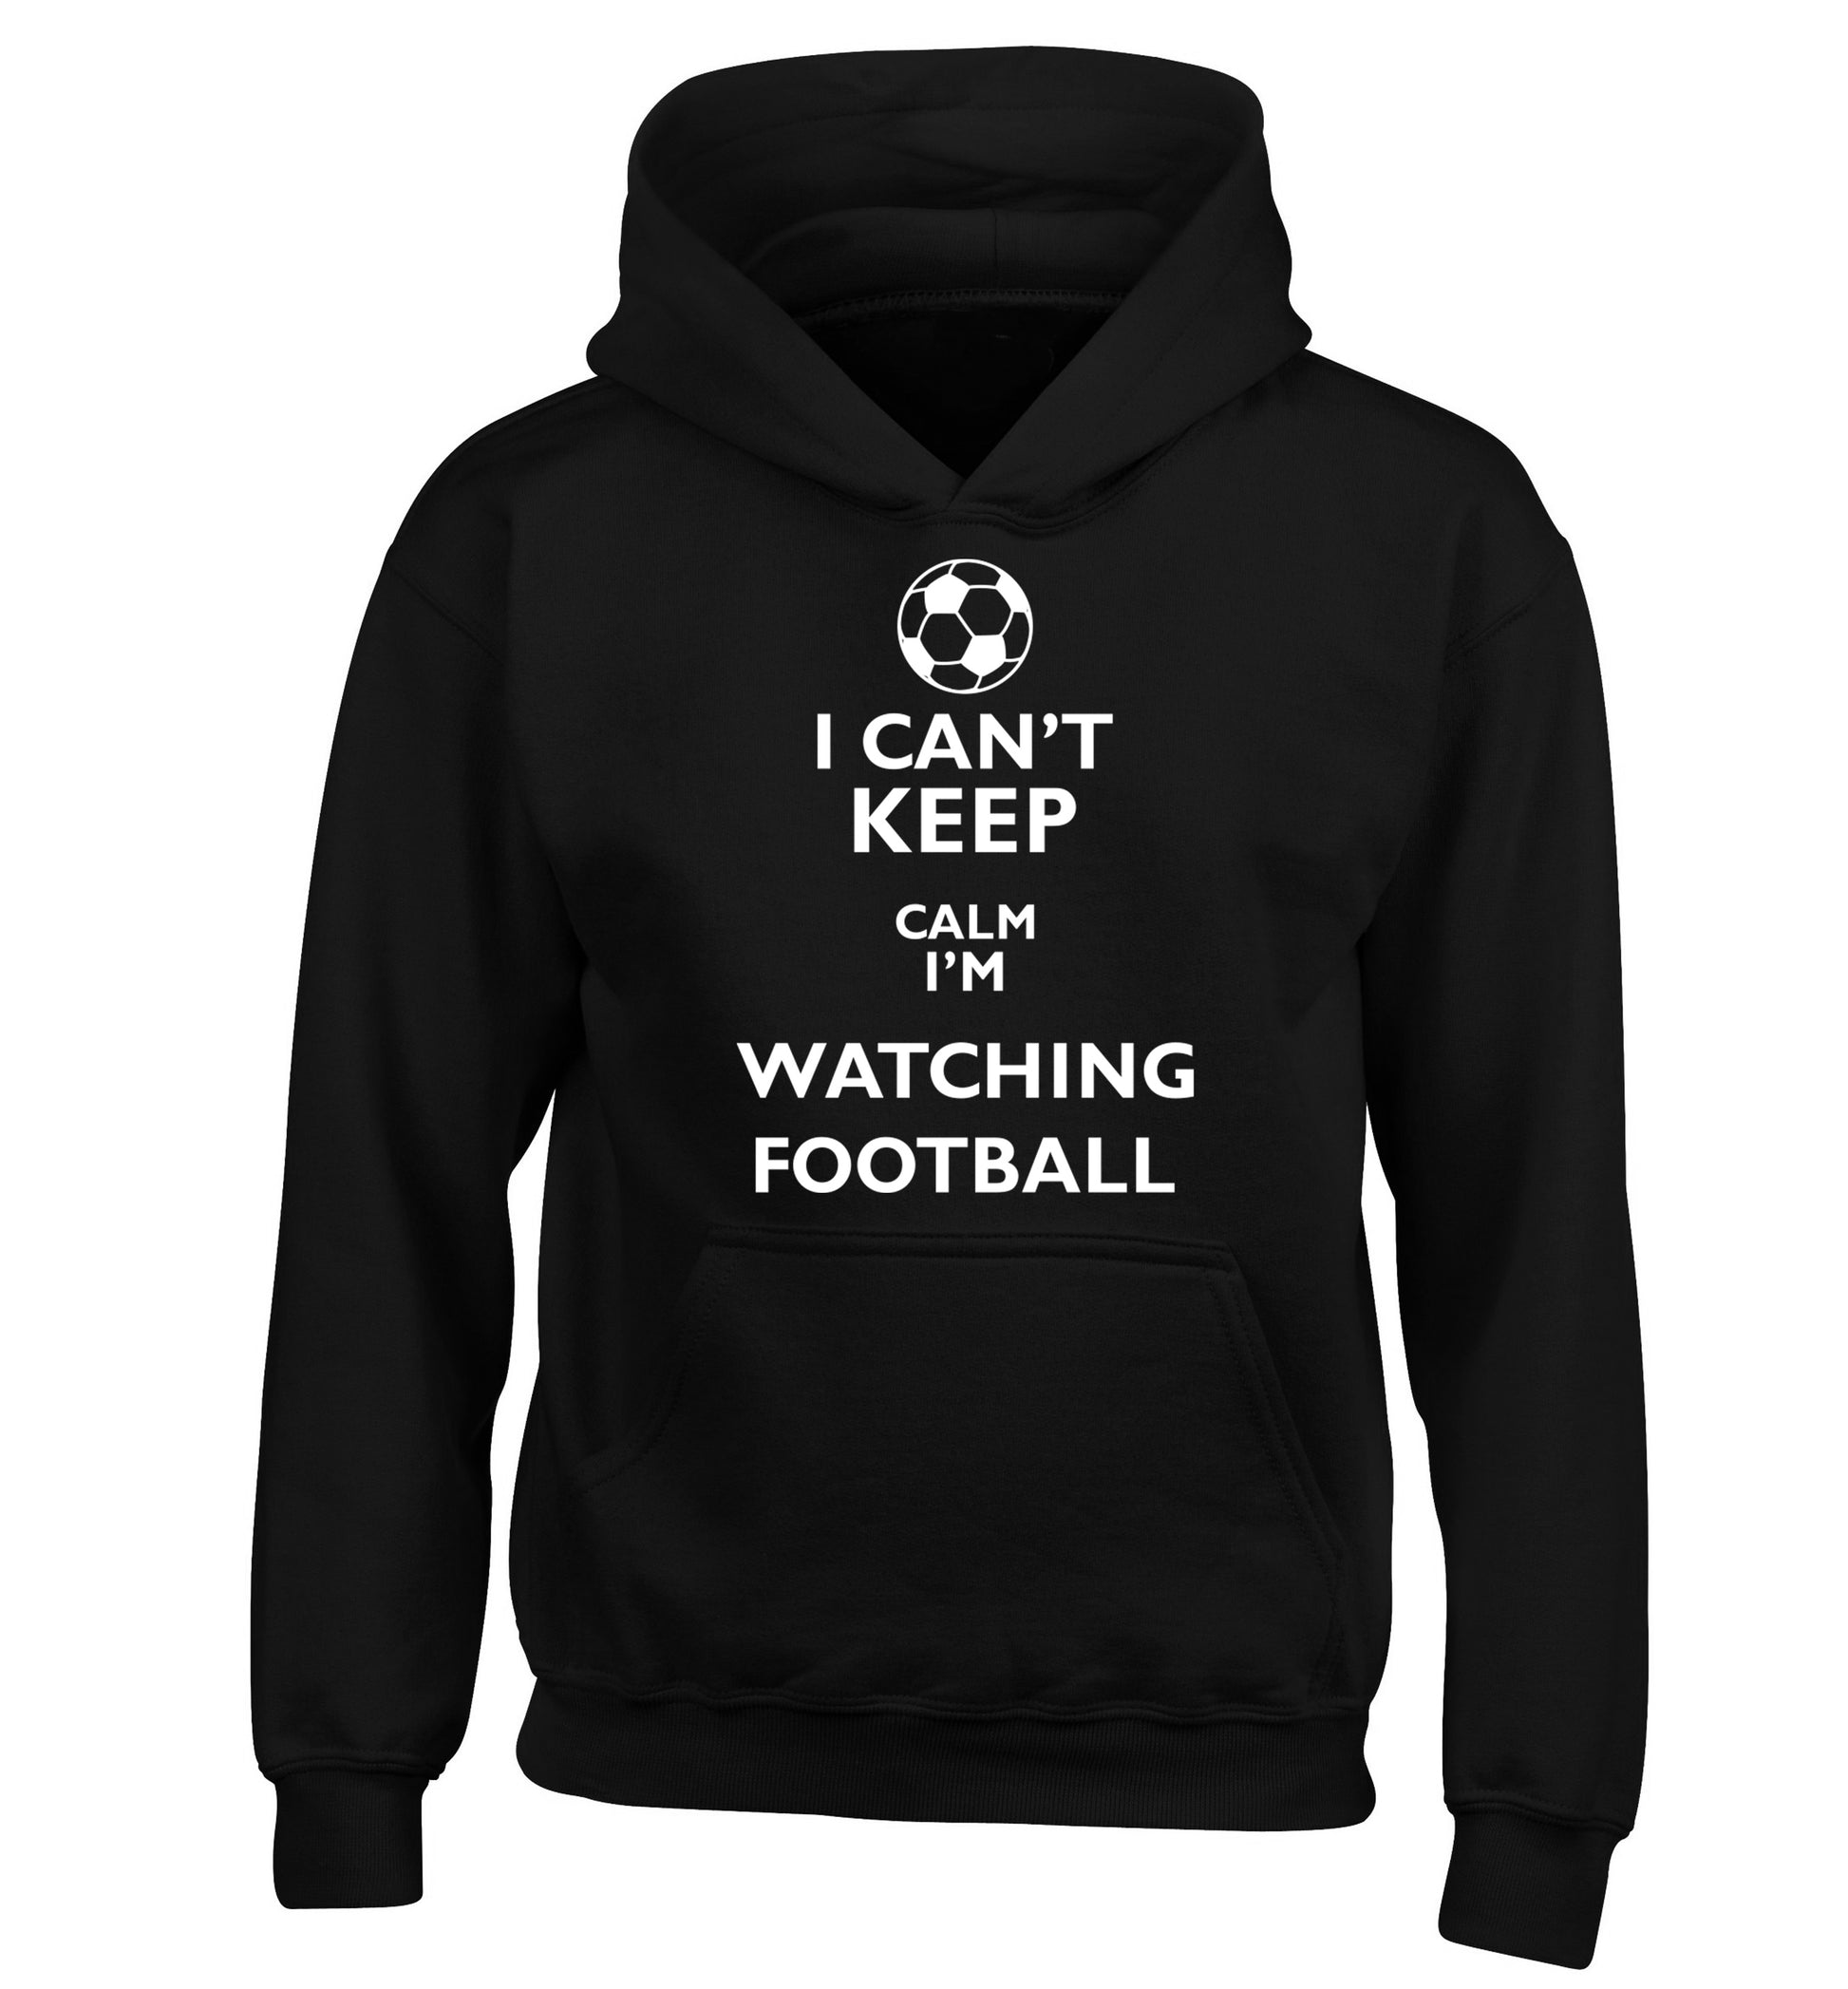 I can't keep calm I'm watching the football children's black hoodie 12-14 Years